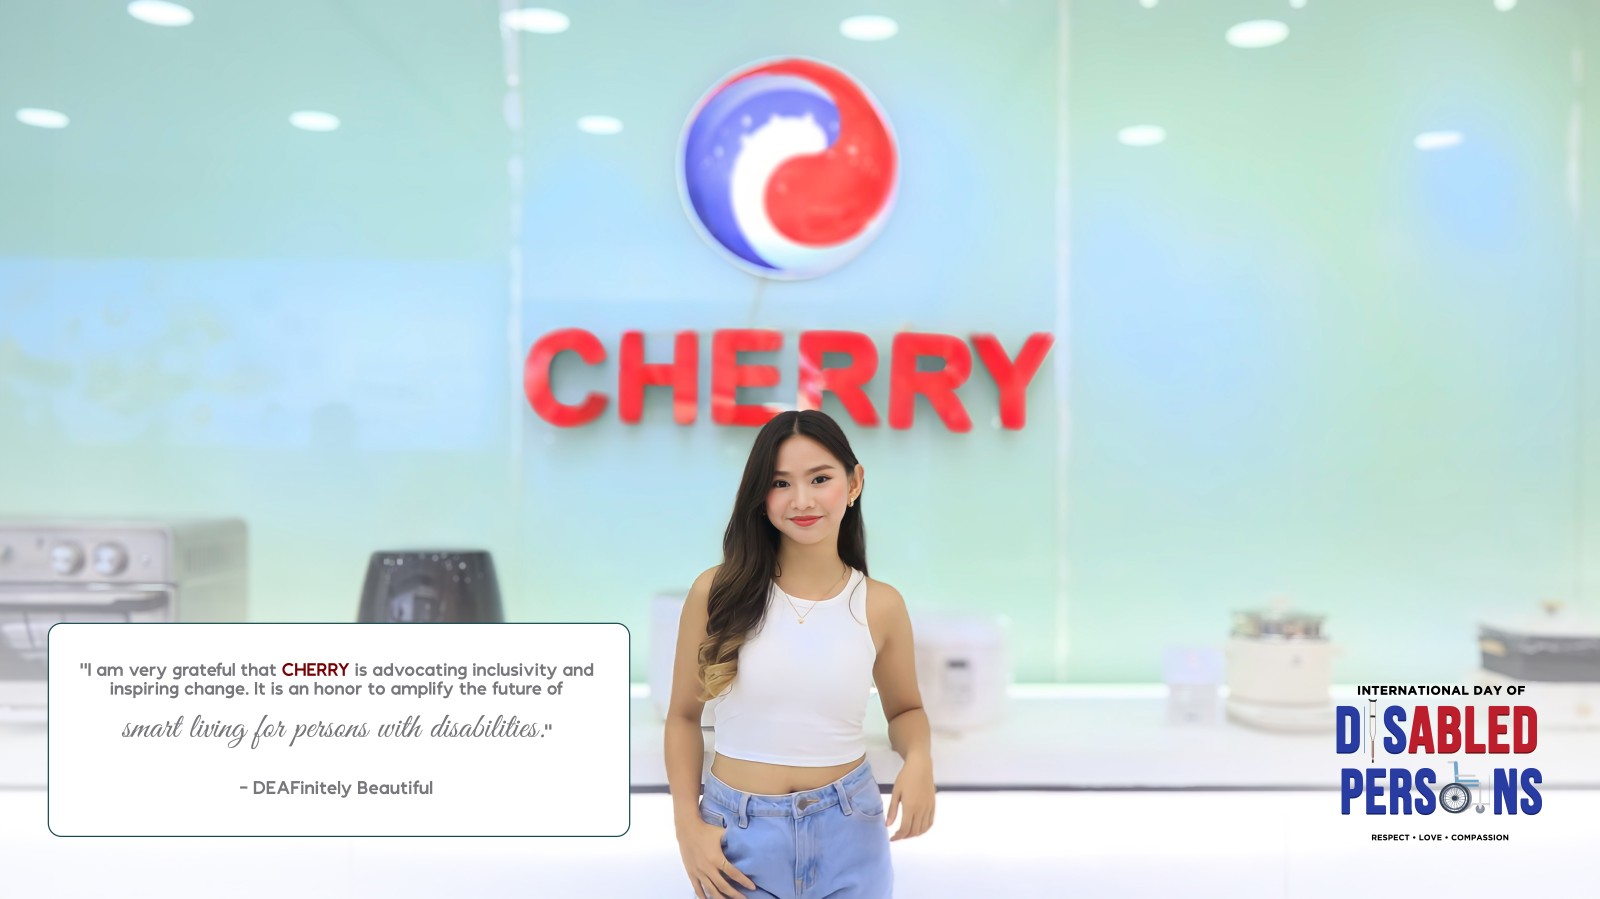 CHERRY CARES FORGES PATHS TO EMPOWERMENT OF INDIVIDUALS WITH DISABILITIES THROUGH INCLUSIVITY